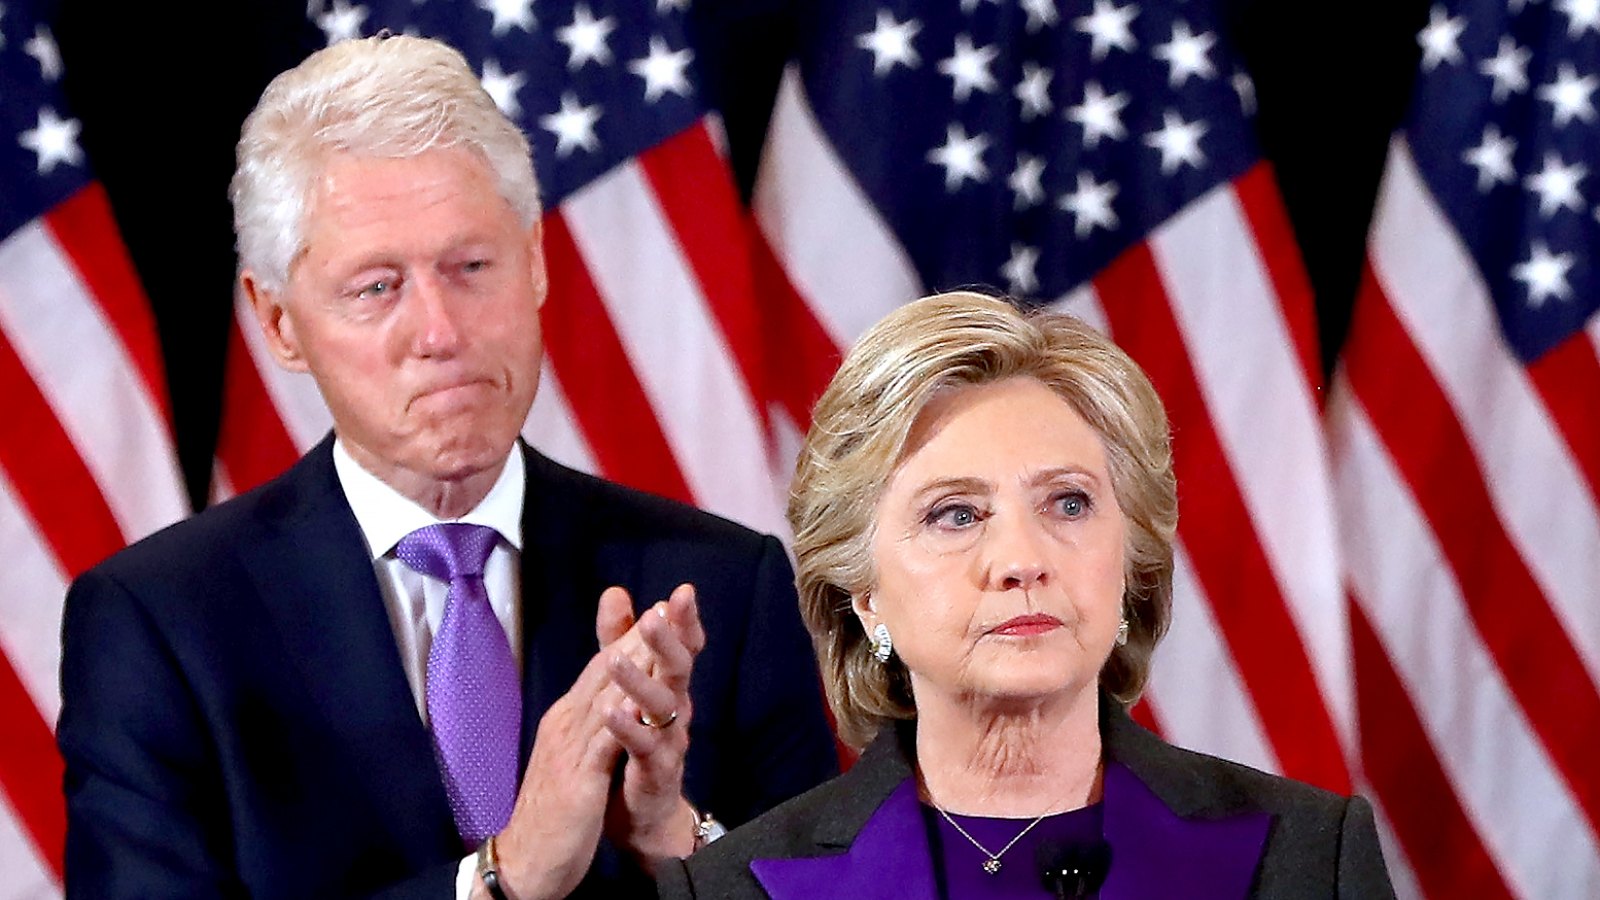 Hillary Clinton and Bill Clinton concedes the presidential election at the New Yorker Hotel on November 9, 2016 in New York City.